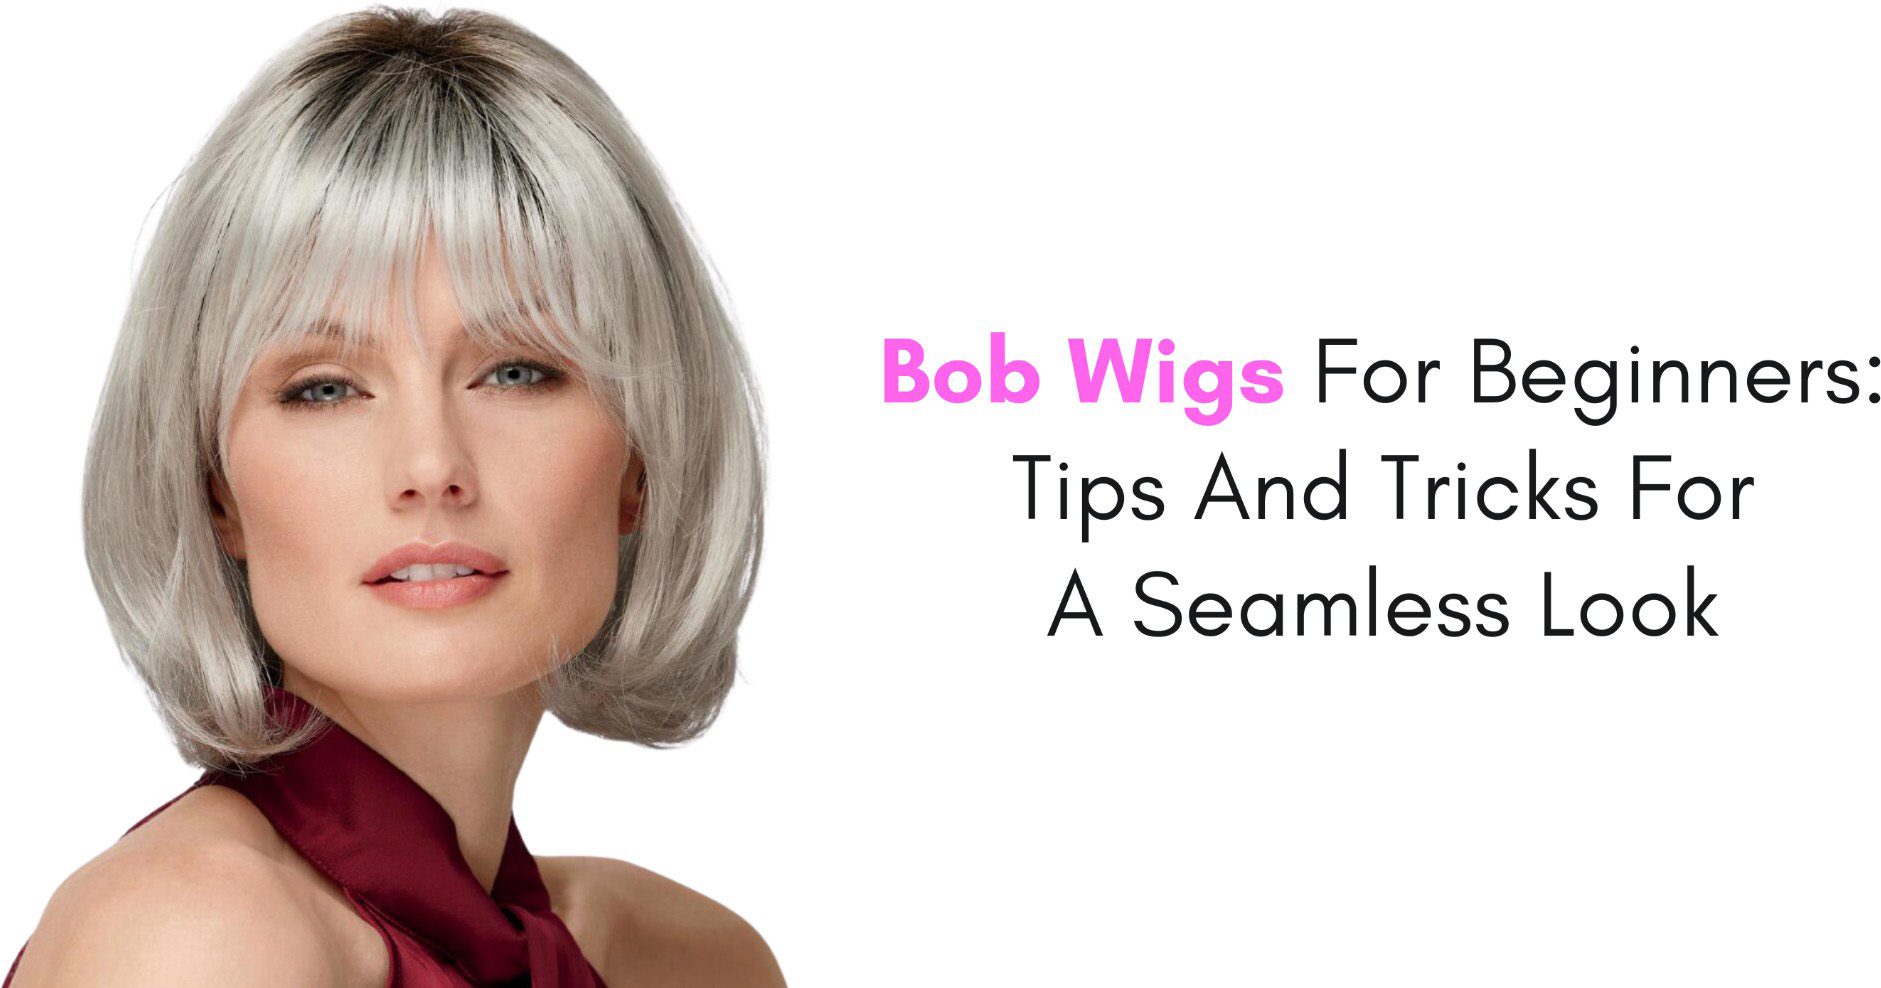 Bob Wigs For Beginners: Tips And Tricks For A Seamless Look